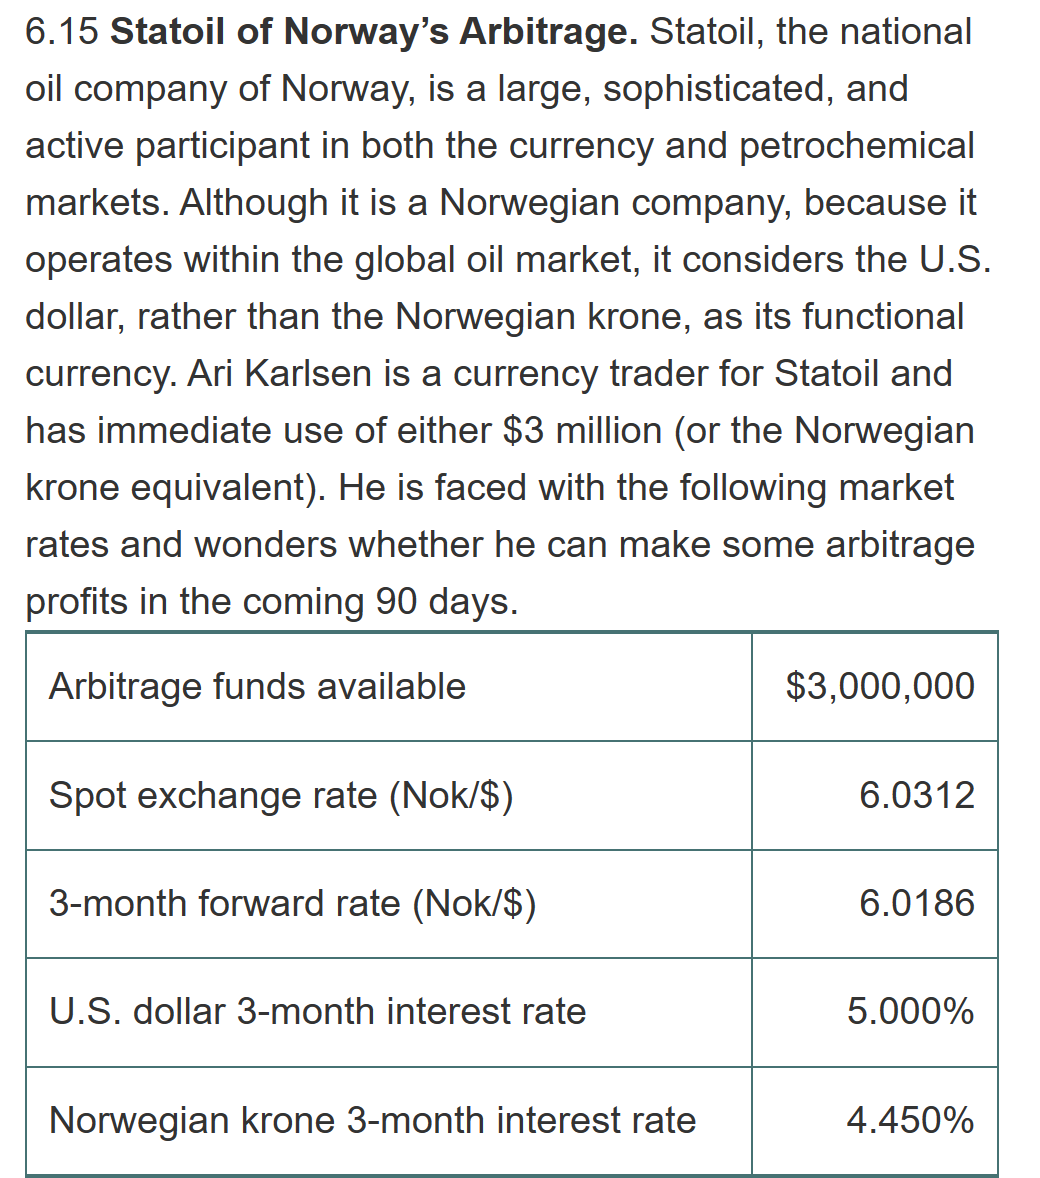 6.15 Statoil of Norway's Arbitrage. Statoil, the national
oil company of Norway, is a large, sophisticated, and
active participant in both the currency and petrochemical
markets. Although it is a Norwegian company, because it
operates within the global oil market, it considers the U.S.
dollar, rather than the Norwegian krone, as its functional
currency. Ari Karlsen is a currency trader for Statoil and
has immediate use of either $3 million (or the Norwegian
krone equivalent). He is faced with the following market
rates and wonders whether he can make some arbitrage
profits in the coming 90 days.
Arbitrage funds available
Spot exchange rate (Nok/$)
3-month forward rate (Nok/$)
U.S. dollar 3-month interest rate
Norwegian krone 3-month interest rate
$3,000,000
6.0312
6.0186
5.000%
4.450%